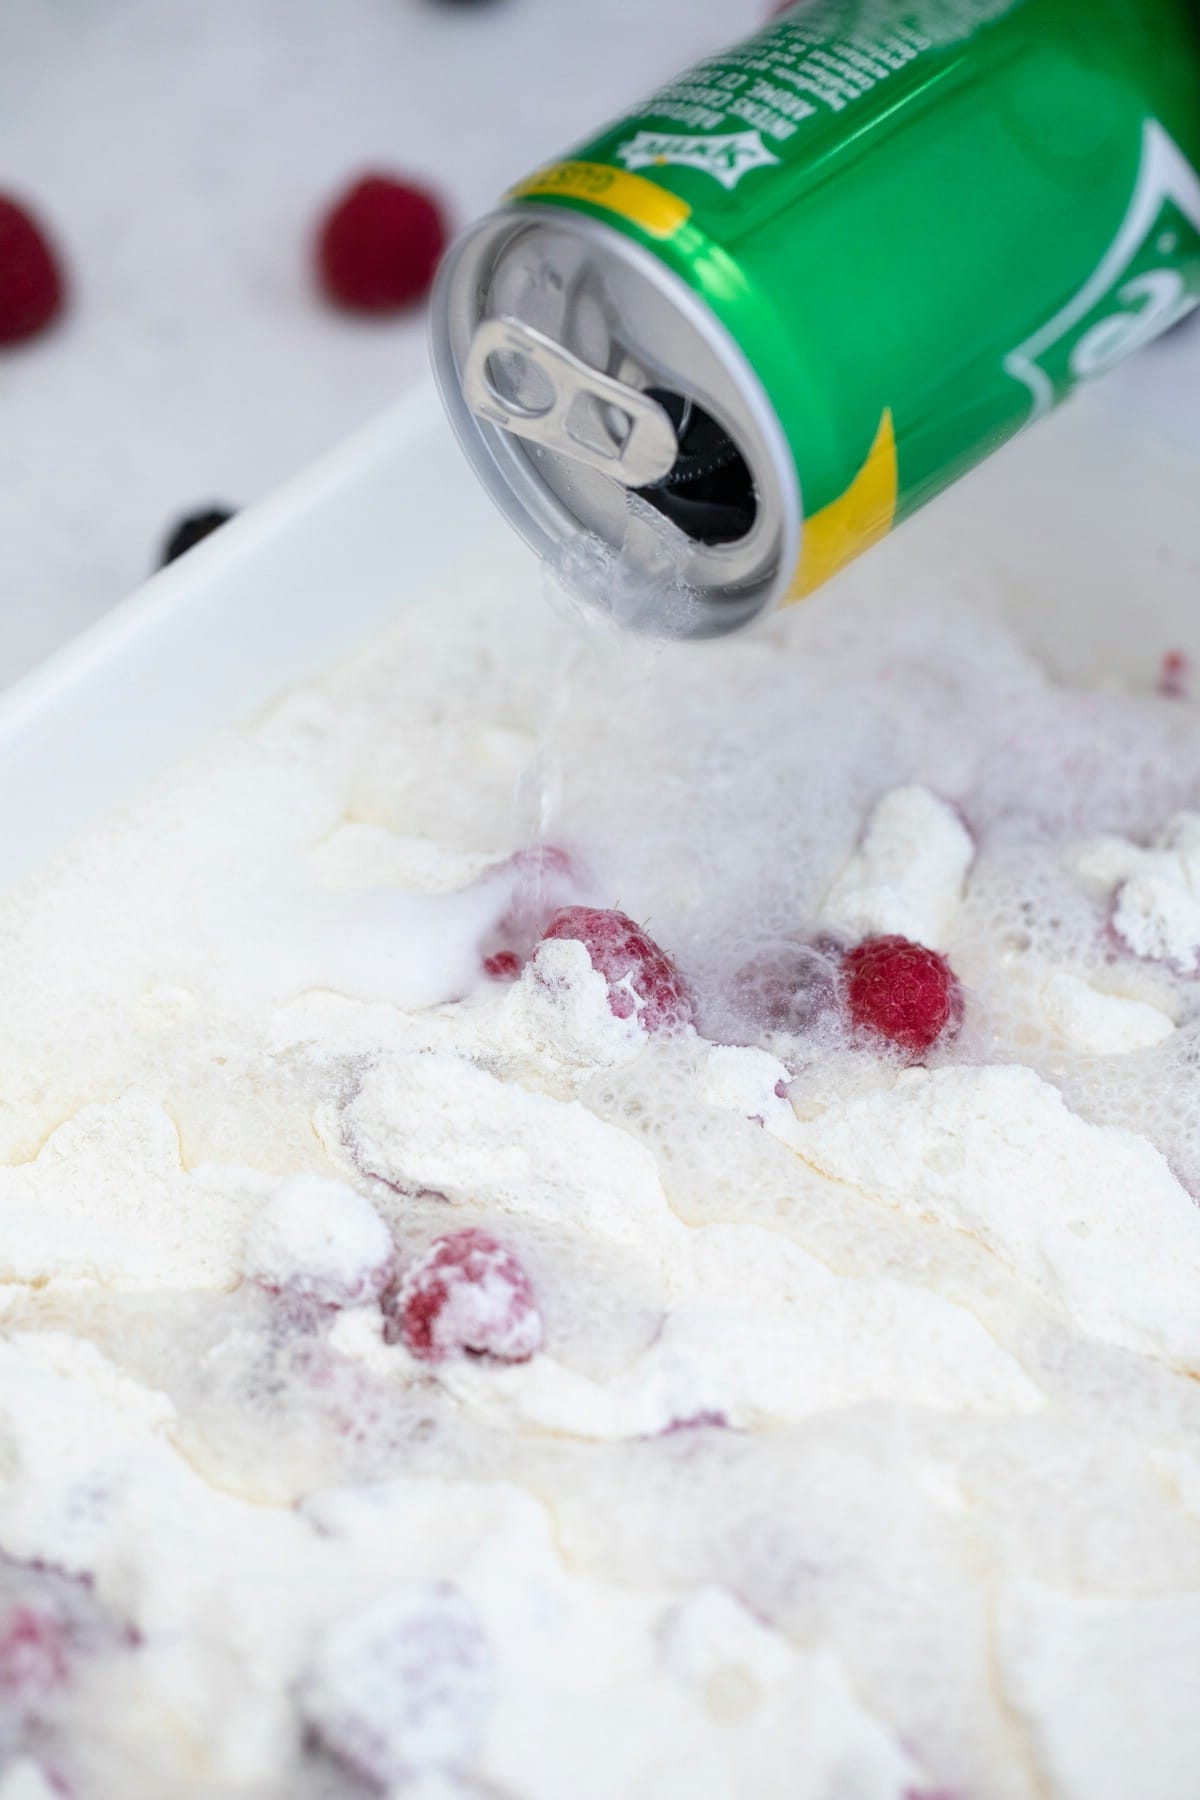 Pouring sprite over berries